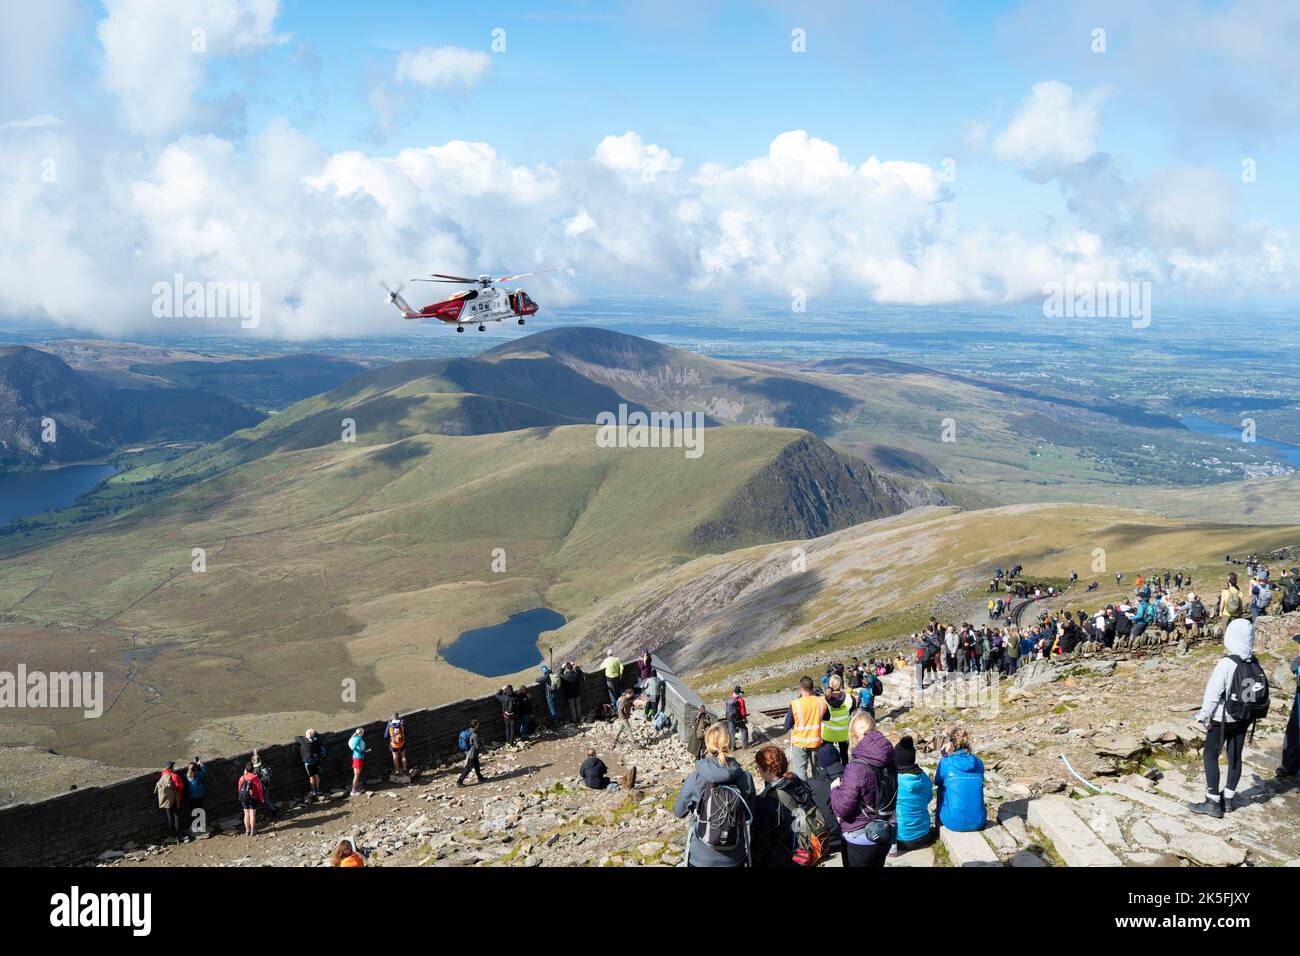 HM Coastguard search and rescue helicopter, Hikers on Snowdon / Yr Wyddfa, Eryri /Snowdonia National park, Wales, UK Stock Photo